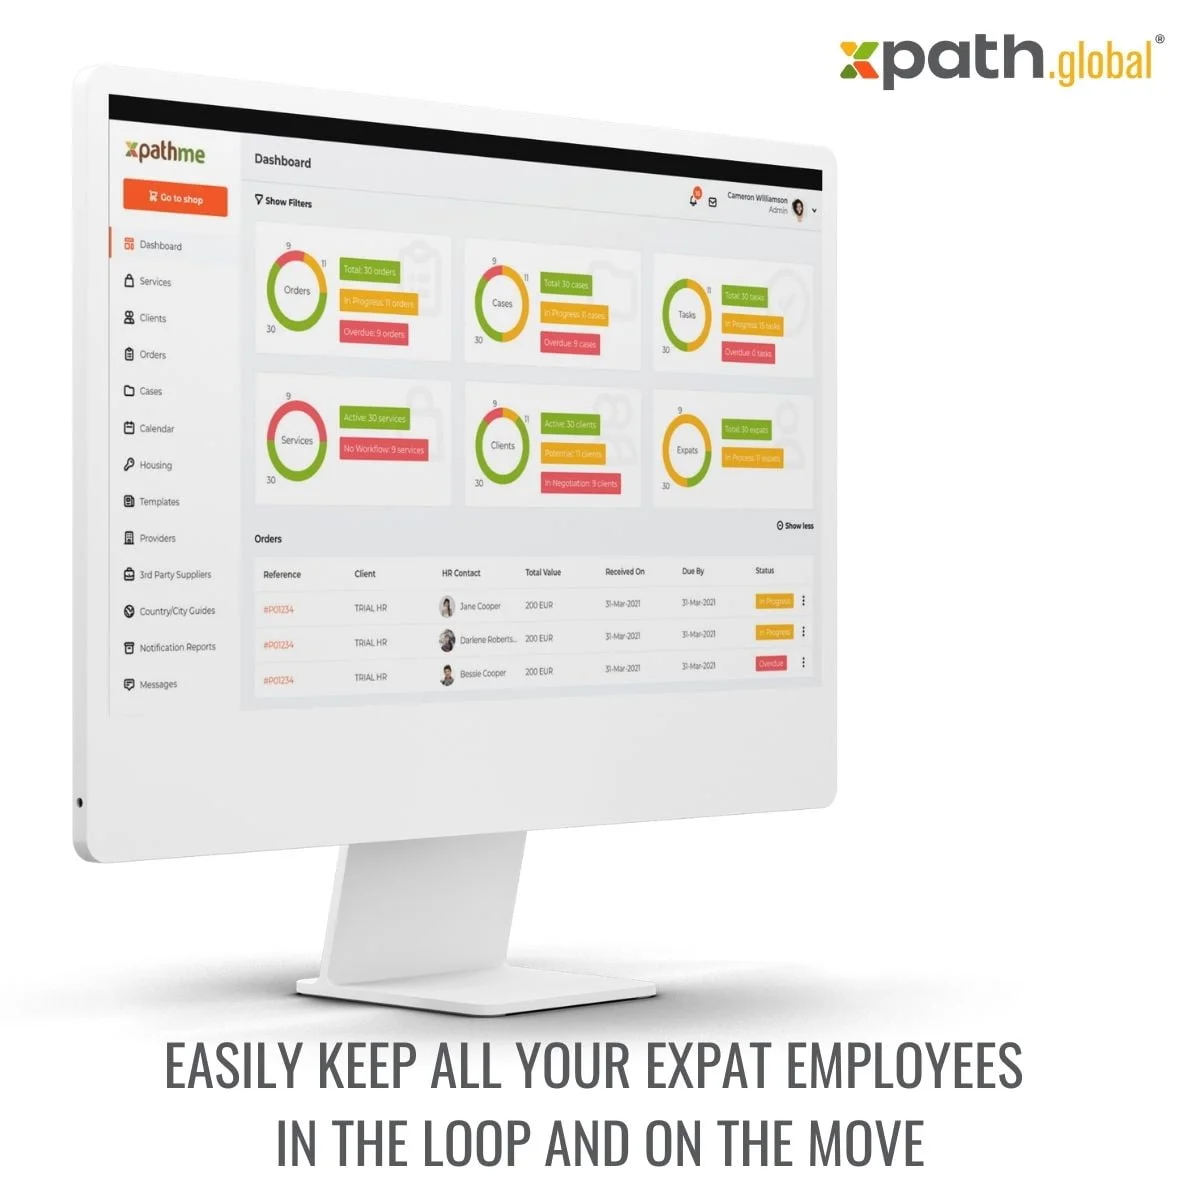 Enjoy great case-tracking capabilities with xpath.global digital ecosystem